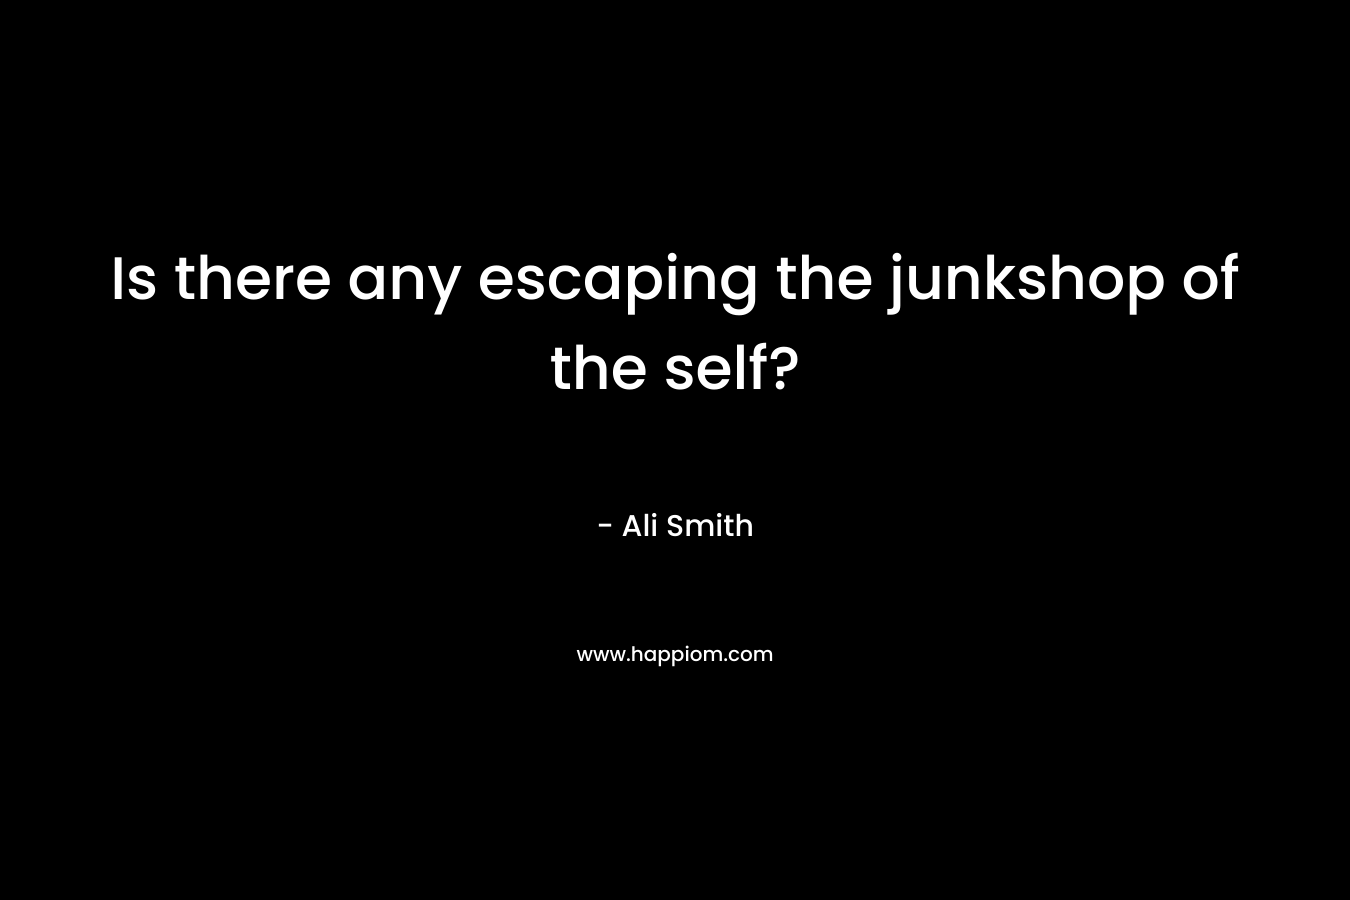 Is there any escaping the junkshop of the self? – Ali Smith